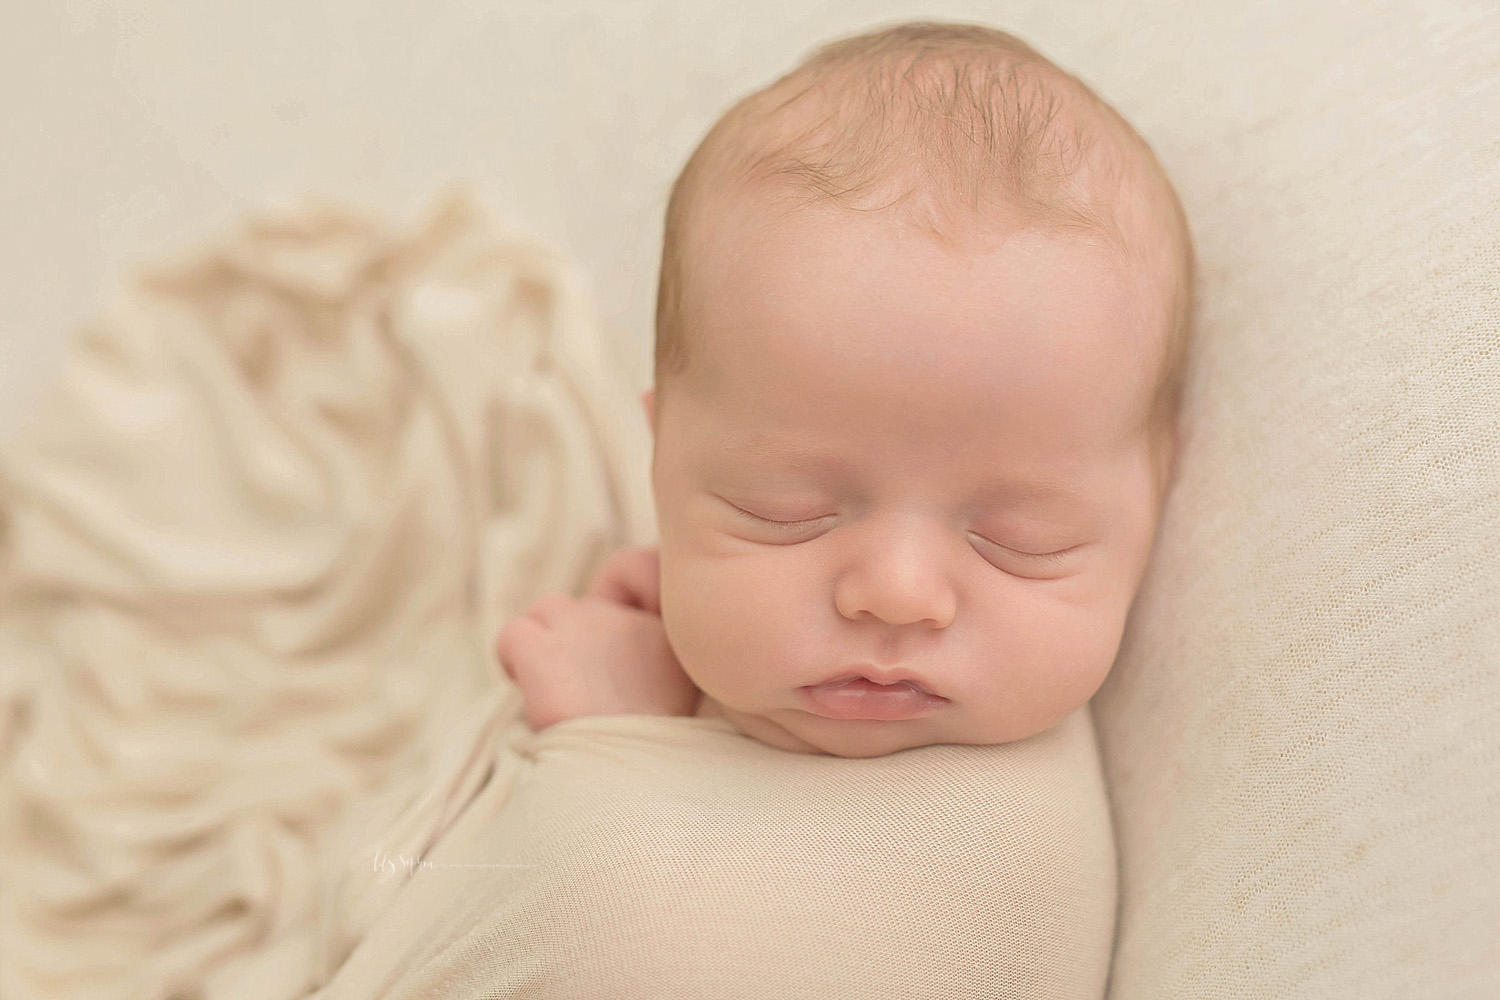  Image of a newborn, baby, boy, with chubby cheeks, sleeping on his back, wrapped up, with just his hands peeking out.&nbsp; 